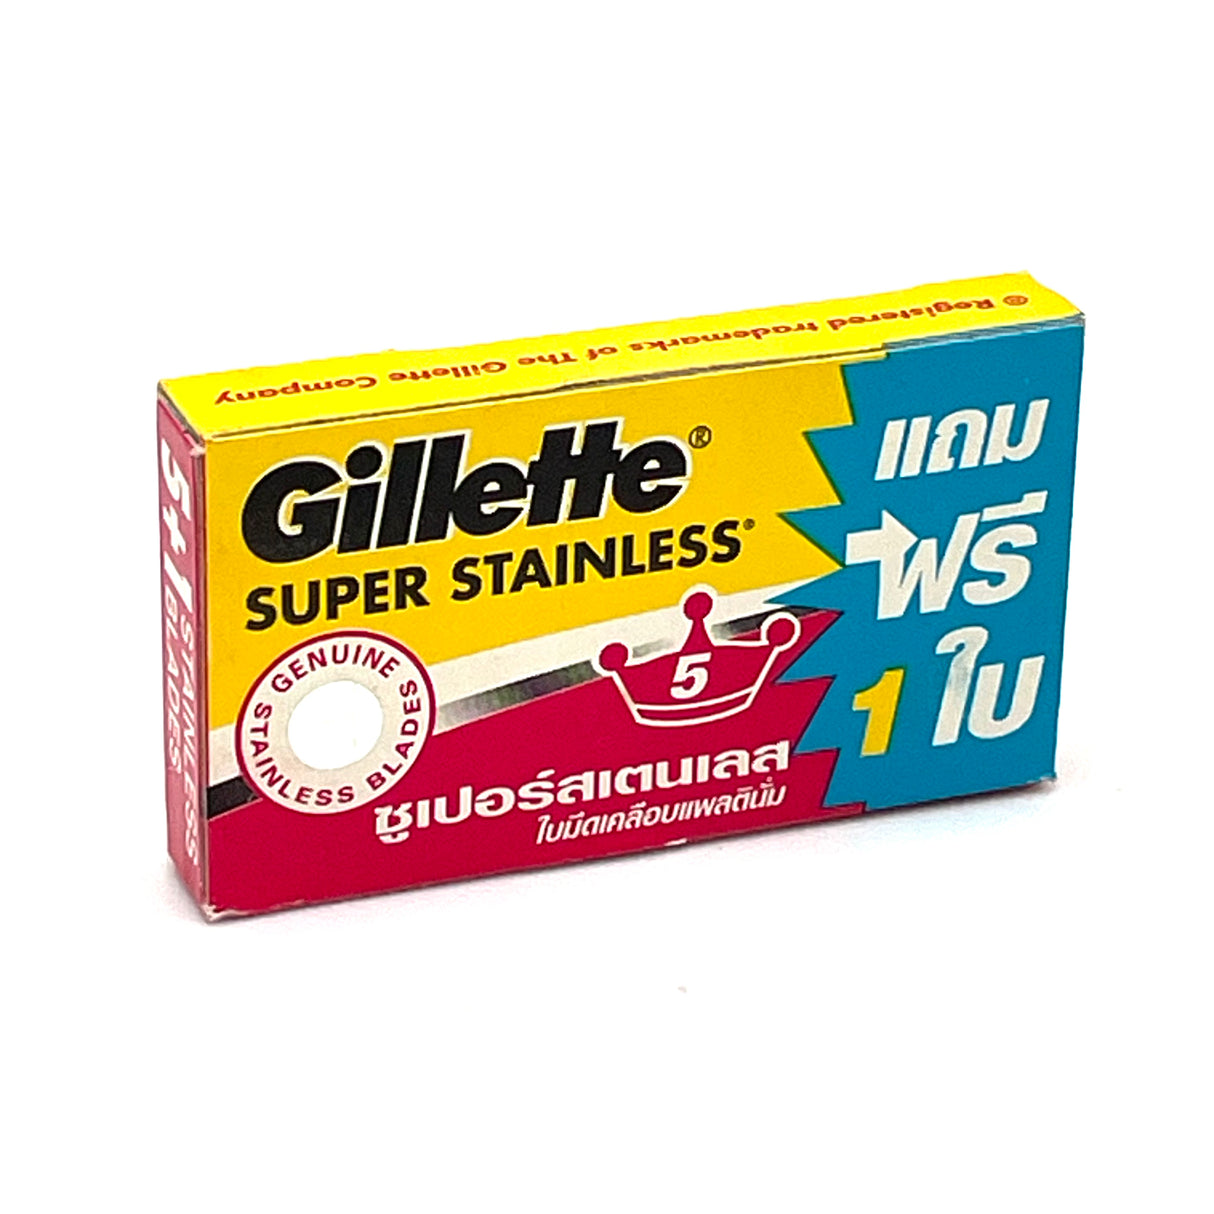 Gillette - Super Stainless Double Edge Safety Razor Blades - Pack of 6 Blades